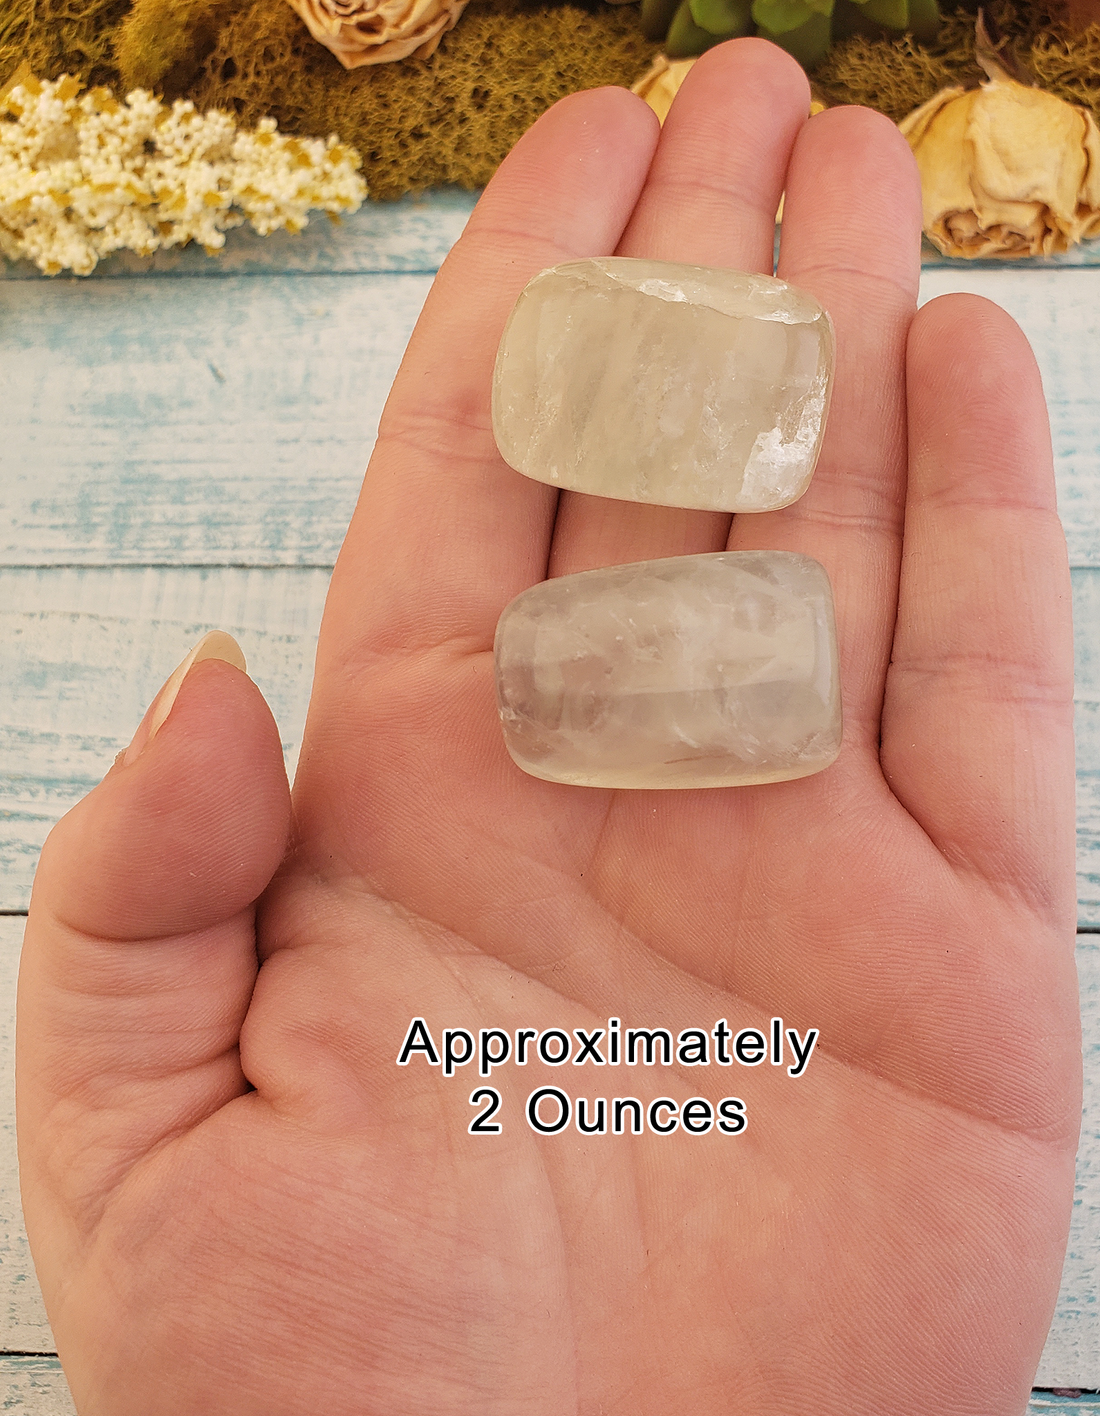 Ghost Pale Fluorite Tumbled Gemstone - 2 Ounces in Hand